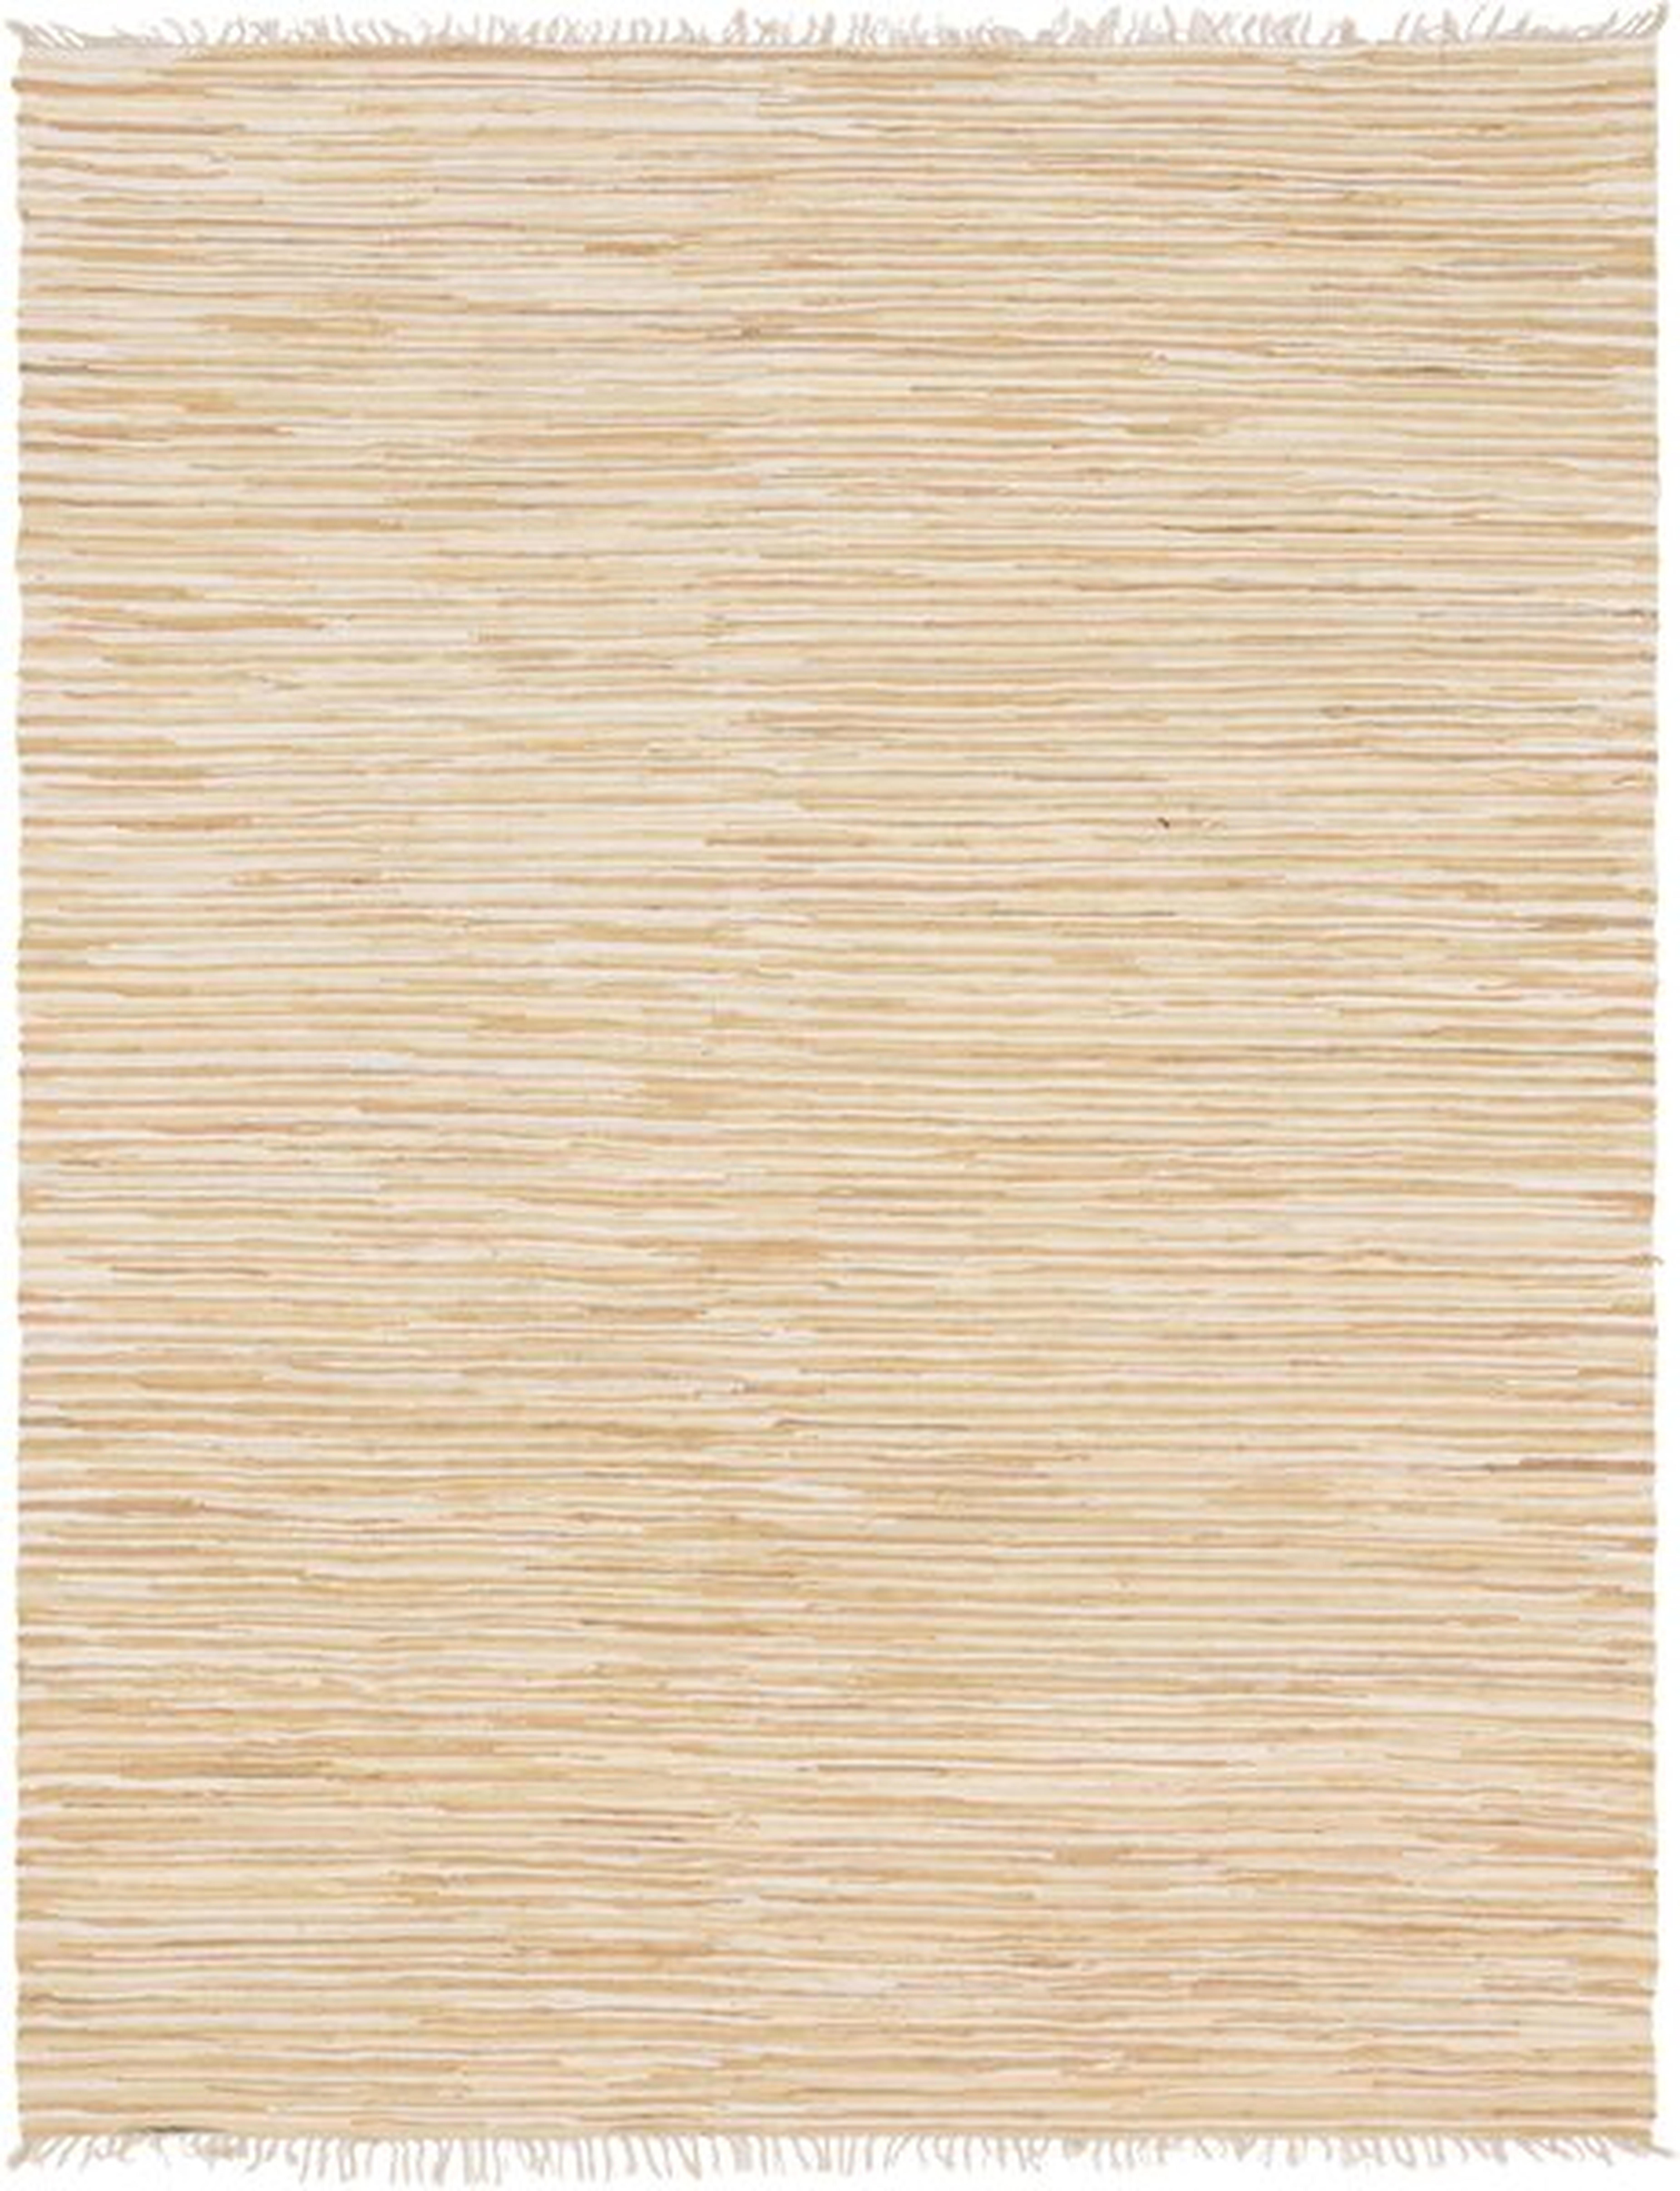 Marchan Chindi Hand-Knotted Cotton Beige Area Rug 9 x 12 - Wayfair